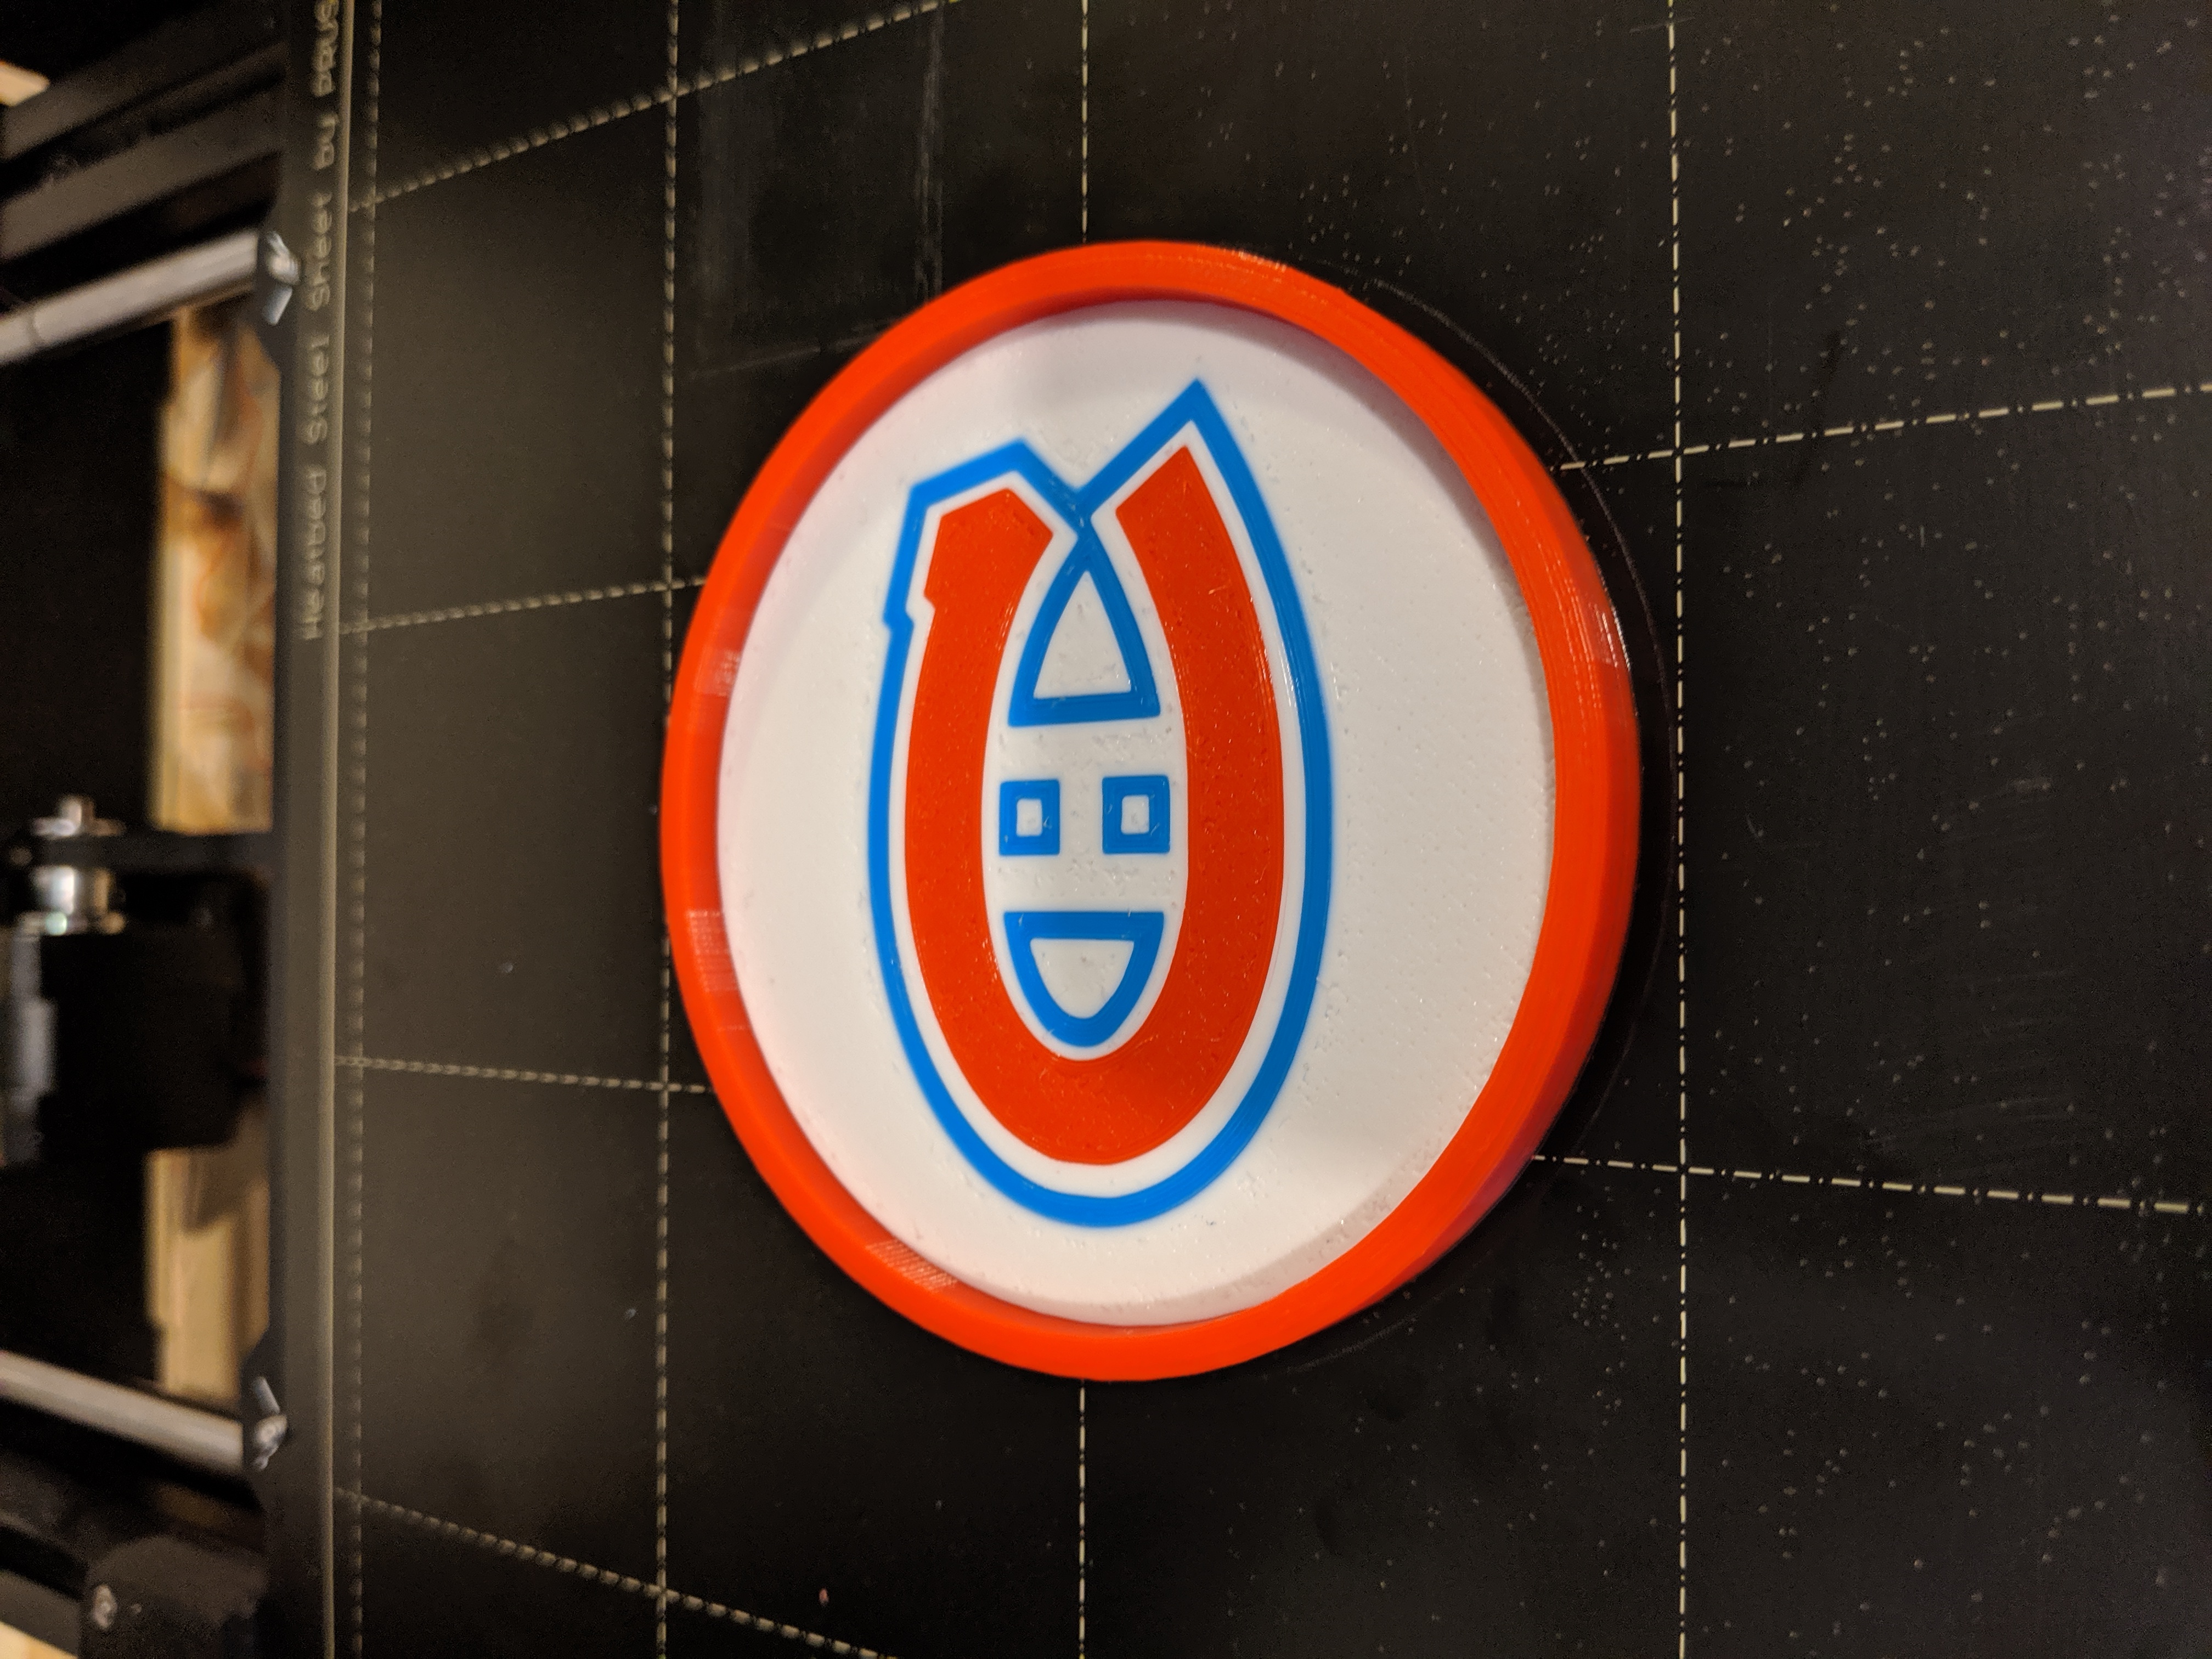 Montreal Canadians (Habs) Coaster MMU2S